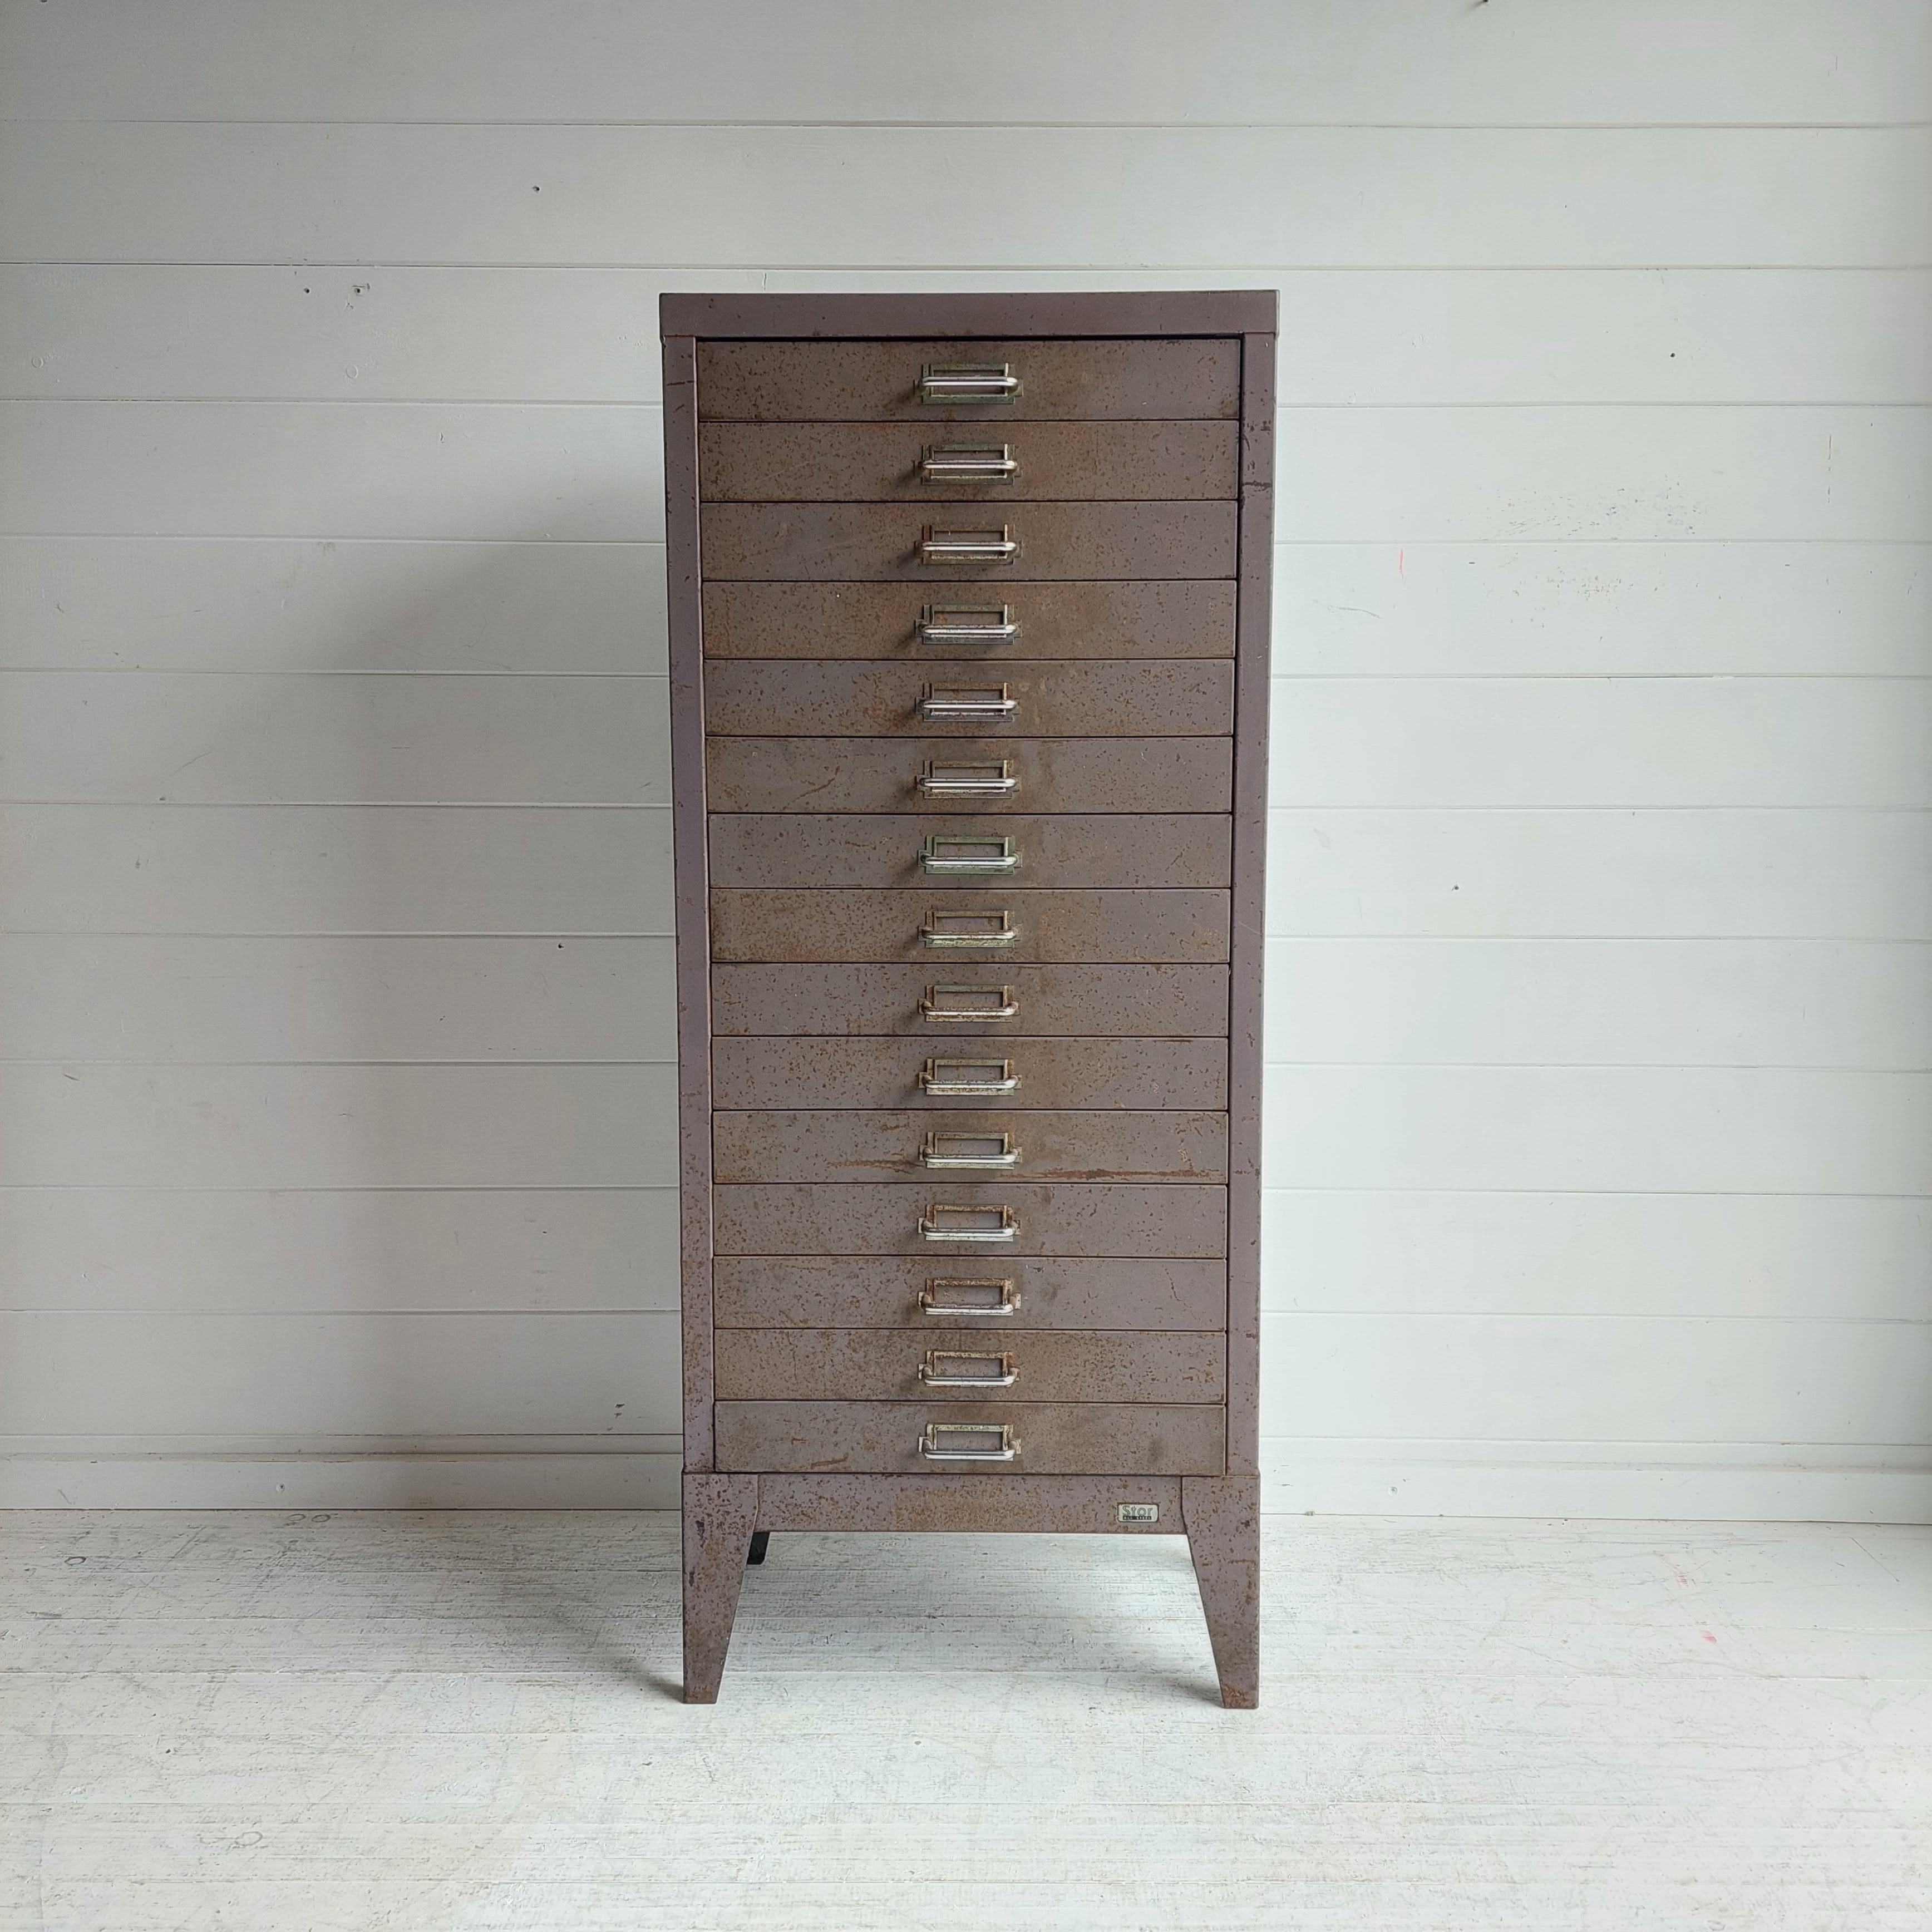 Tall and Narrow Reclaimed Vintage Industrial 1950s  Steel 15 Drawer Filing Cabinet with chrome handles. 
Manufactured by Stor
This is a very rare model with 15 shallow drawers.
Rare find

Engineers cabinet
Each of the ten drawers has a label tag